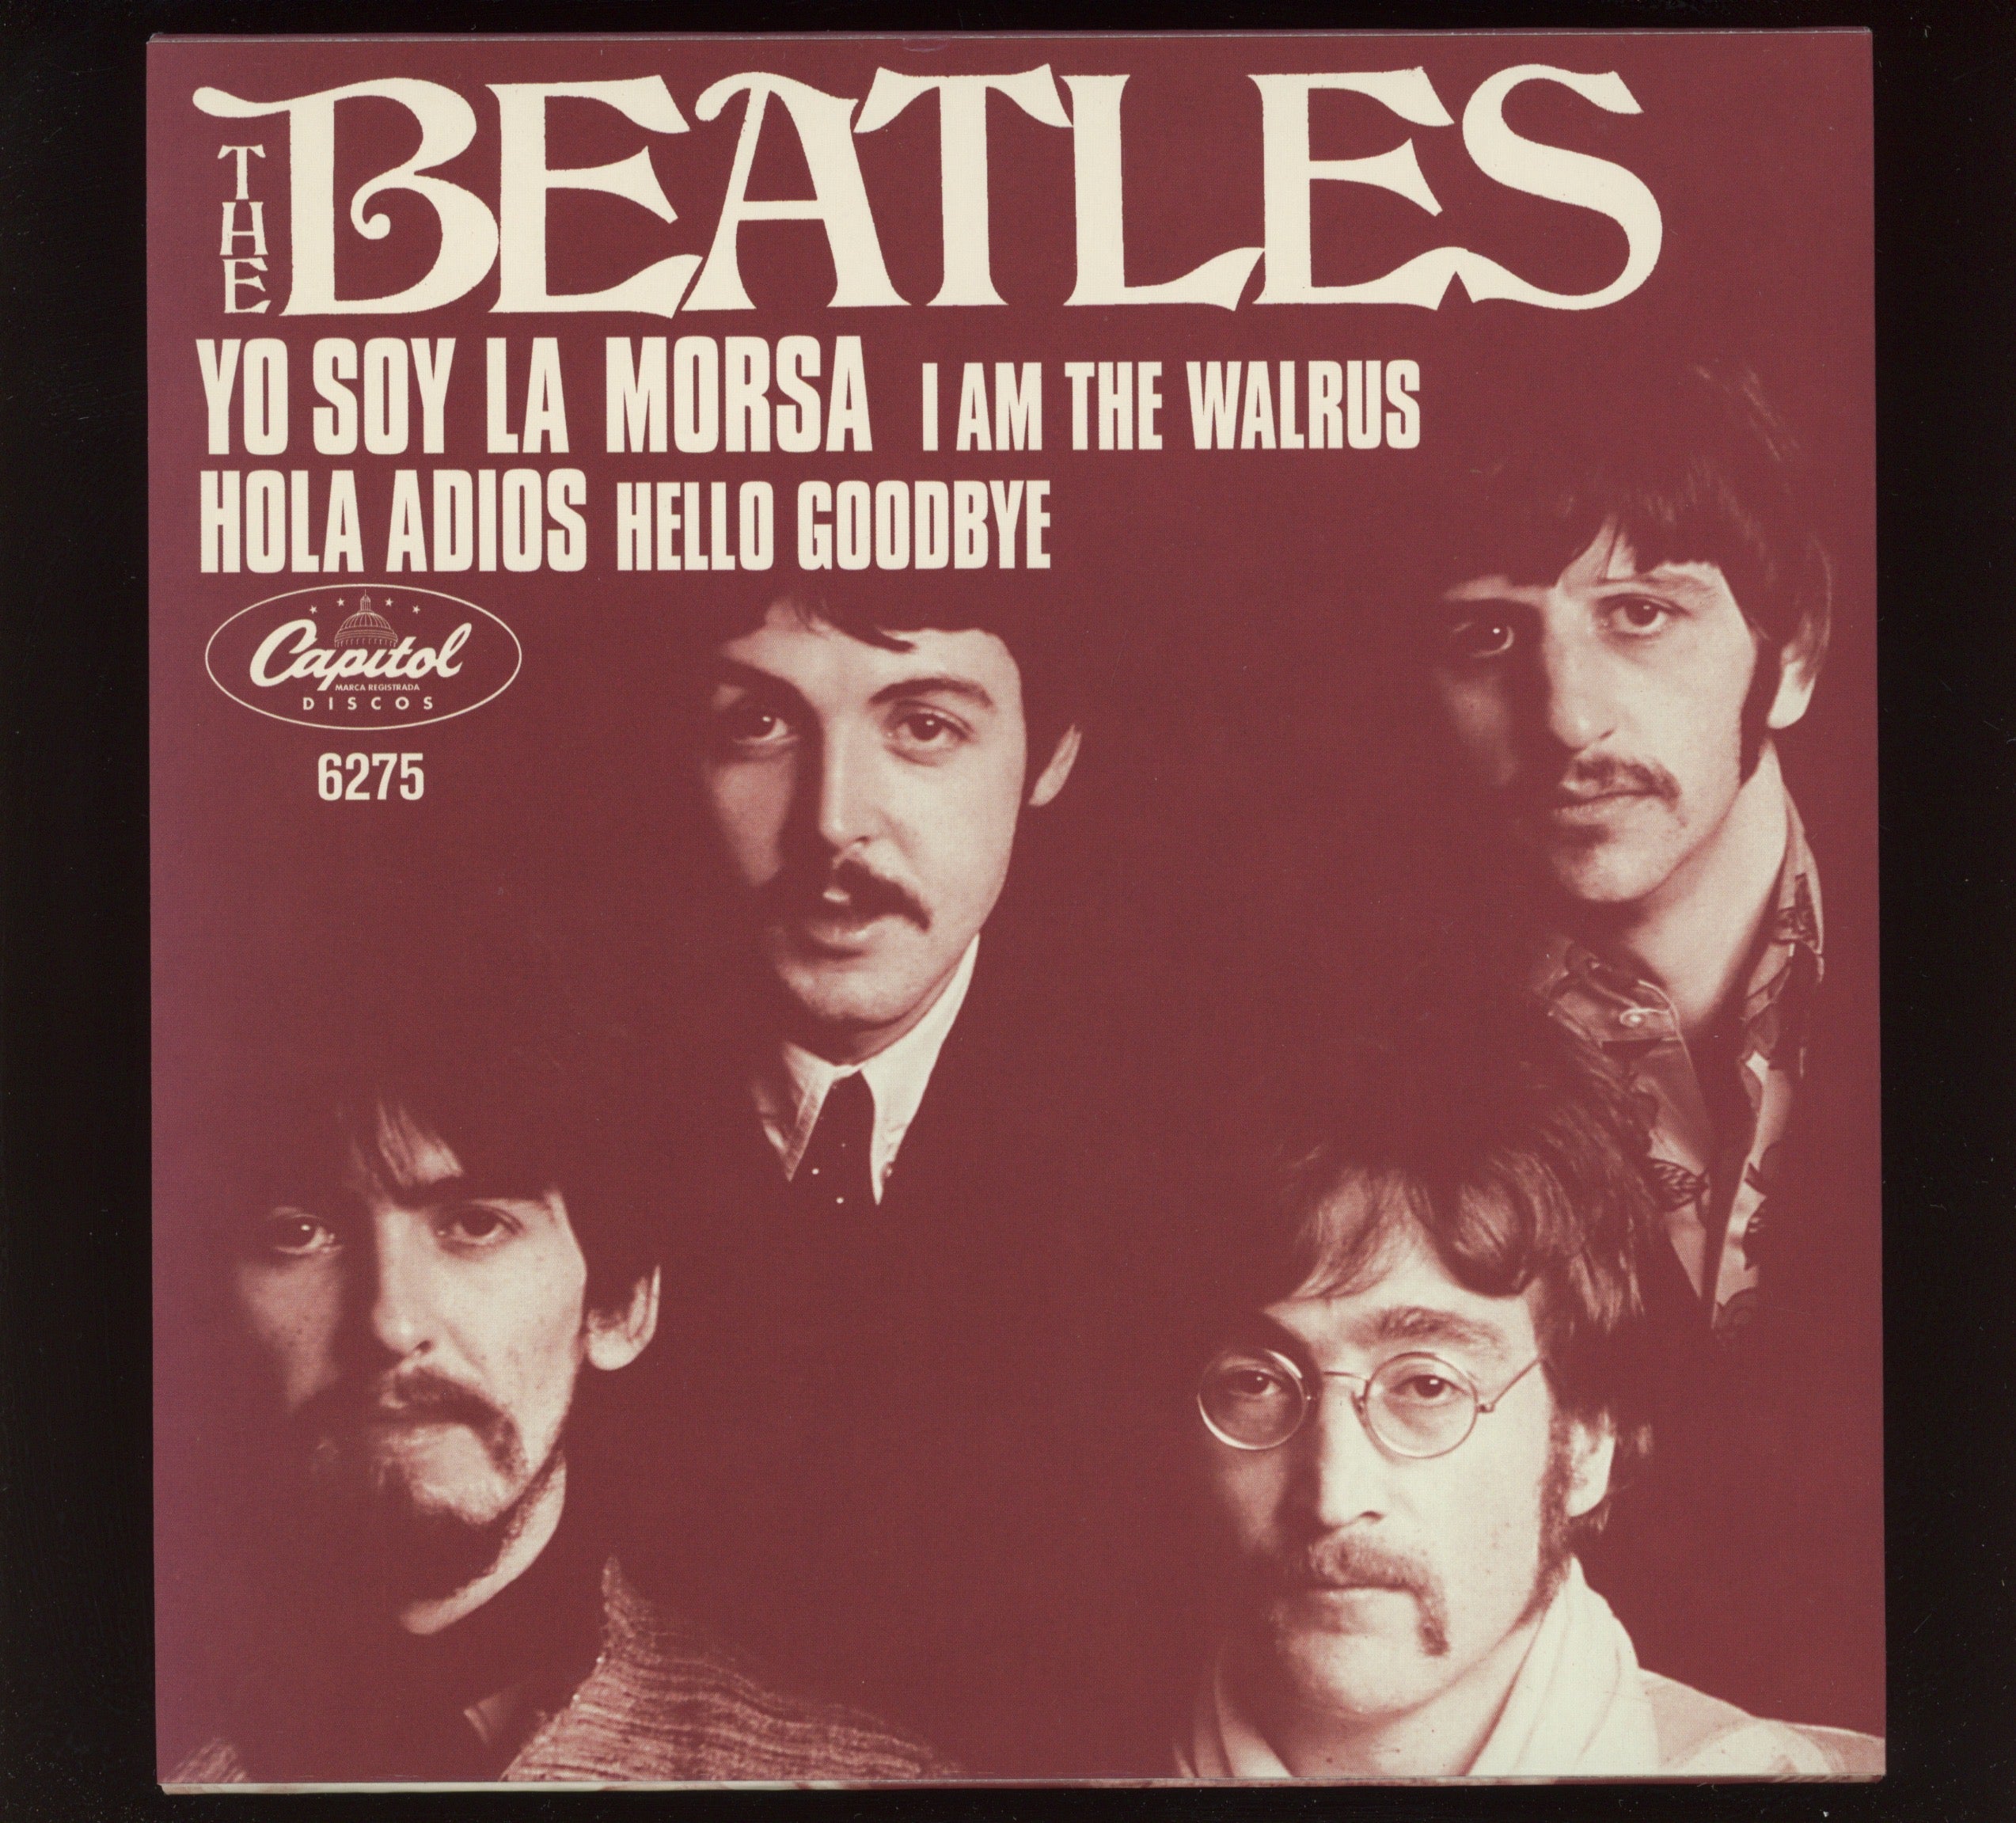 The Beatles - Hello, Goodbye / I Am The Walrus Hola Adios on Discos Capitol 7" Reissue With Picture Sleeve